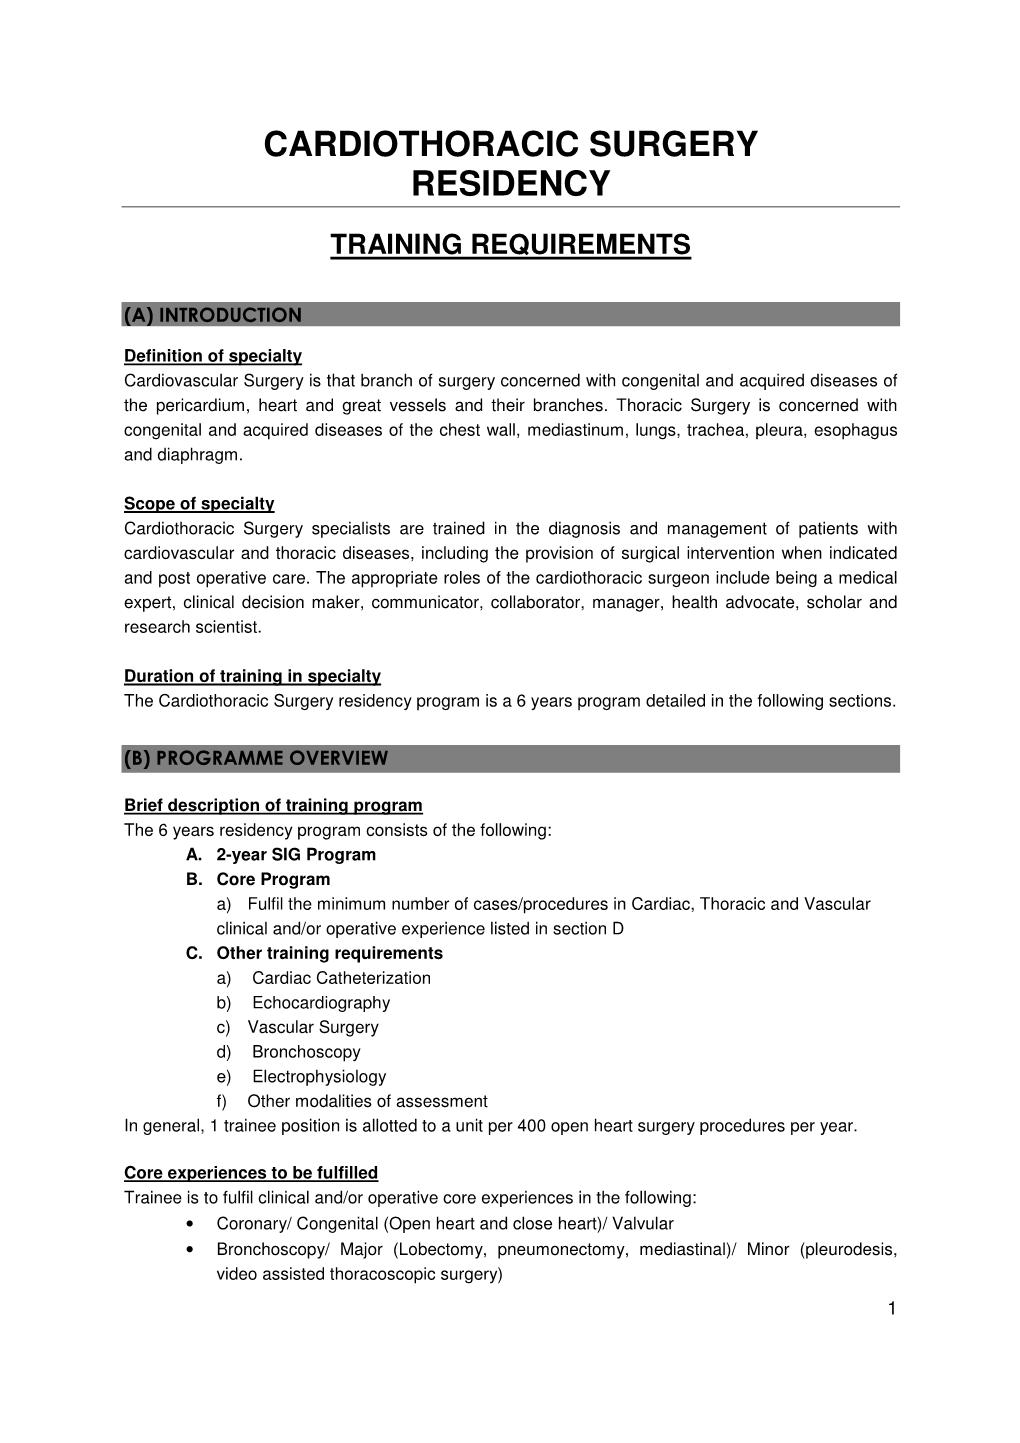 Cardiothoracic Surgery Residency Training Requirements